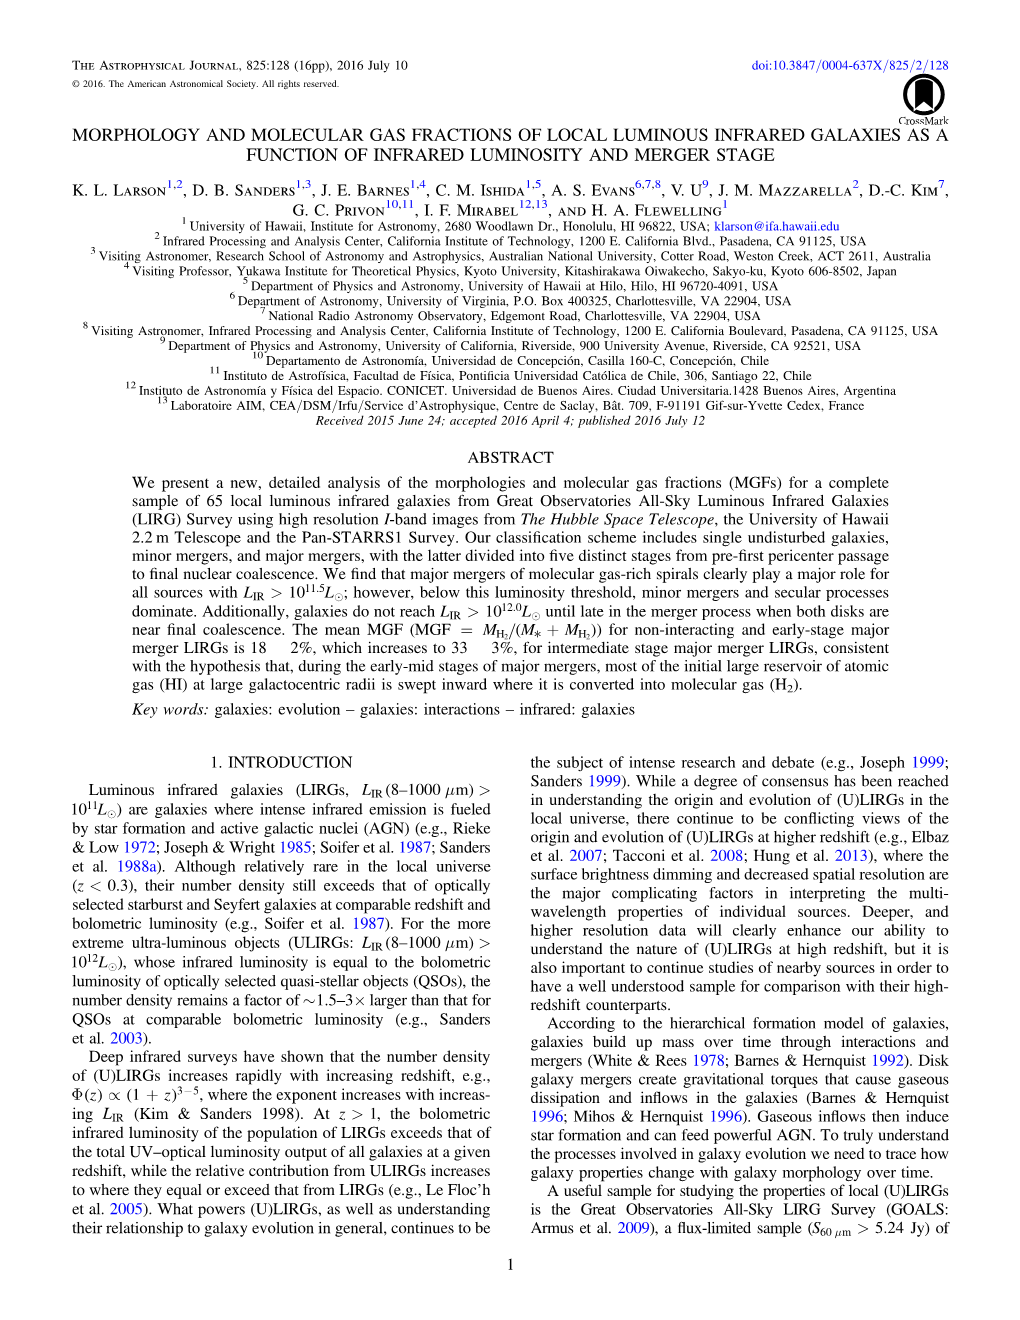 Morphology and Molecular Gas Fractions of Local Luminous Infrared Galaxies As a Function of Infrared Luminosity and Merger Stage K